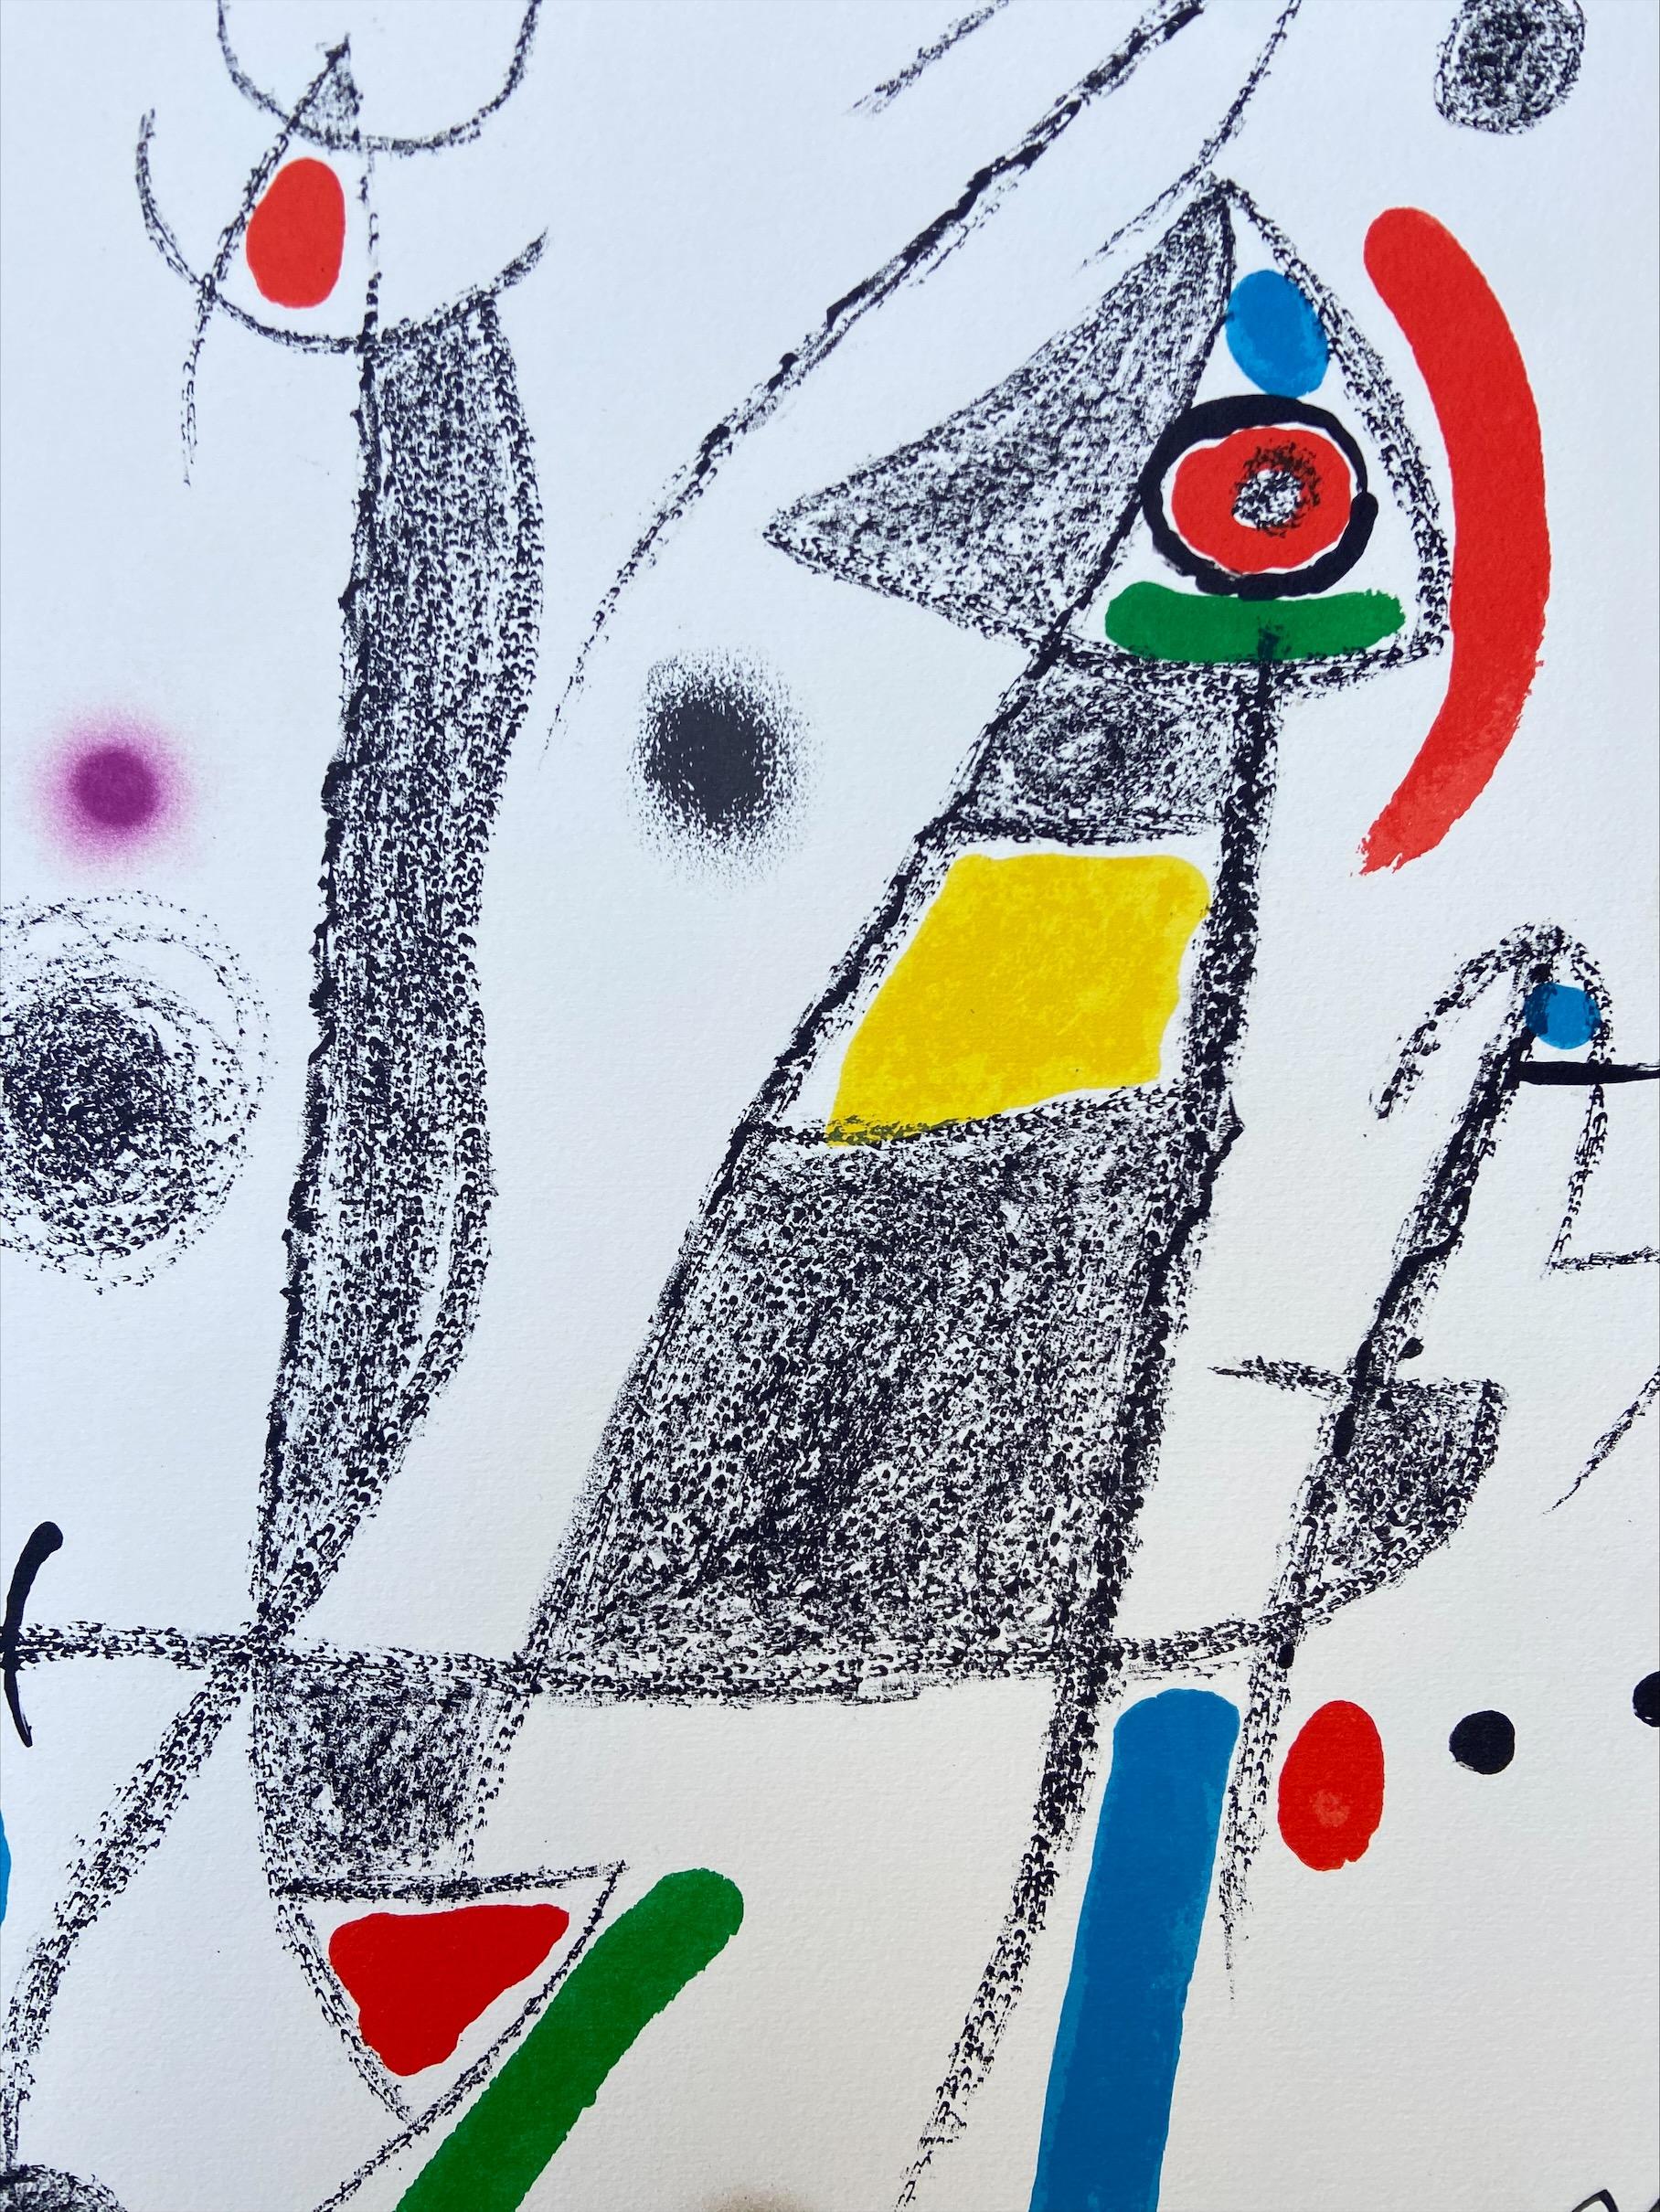 Joan Miró - Maravillas con variaciones n-6
Lithography 
35,7x49,6cm
Signed in the plate 
1975
Edition of 1500 copies on Guarro paper
Publisher : Poligrafa Barcelona 
890€